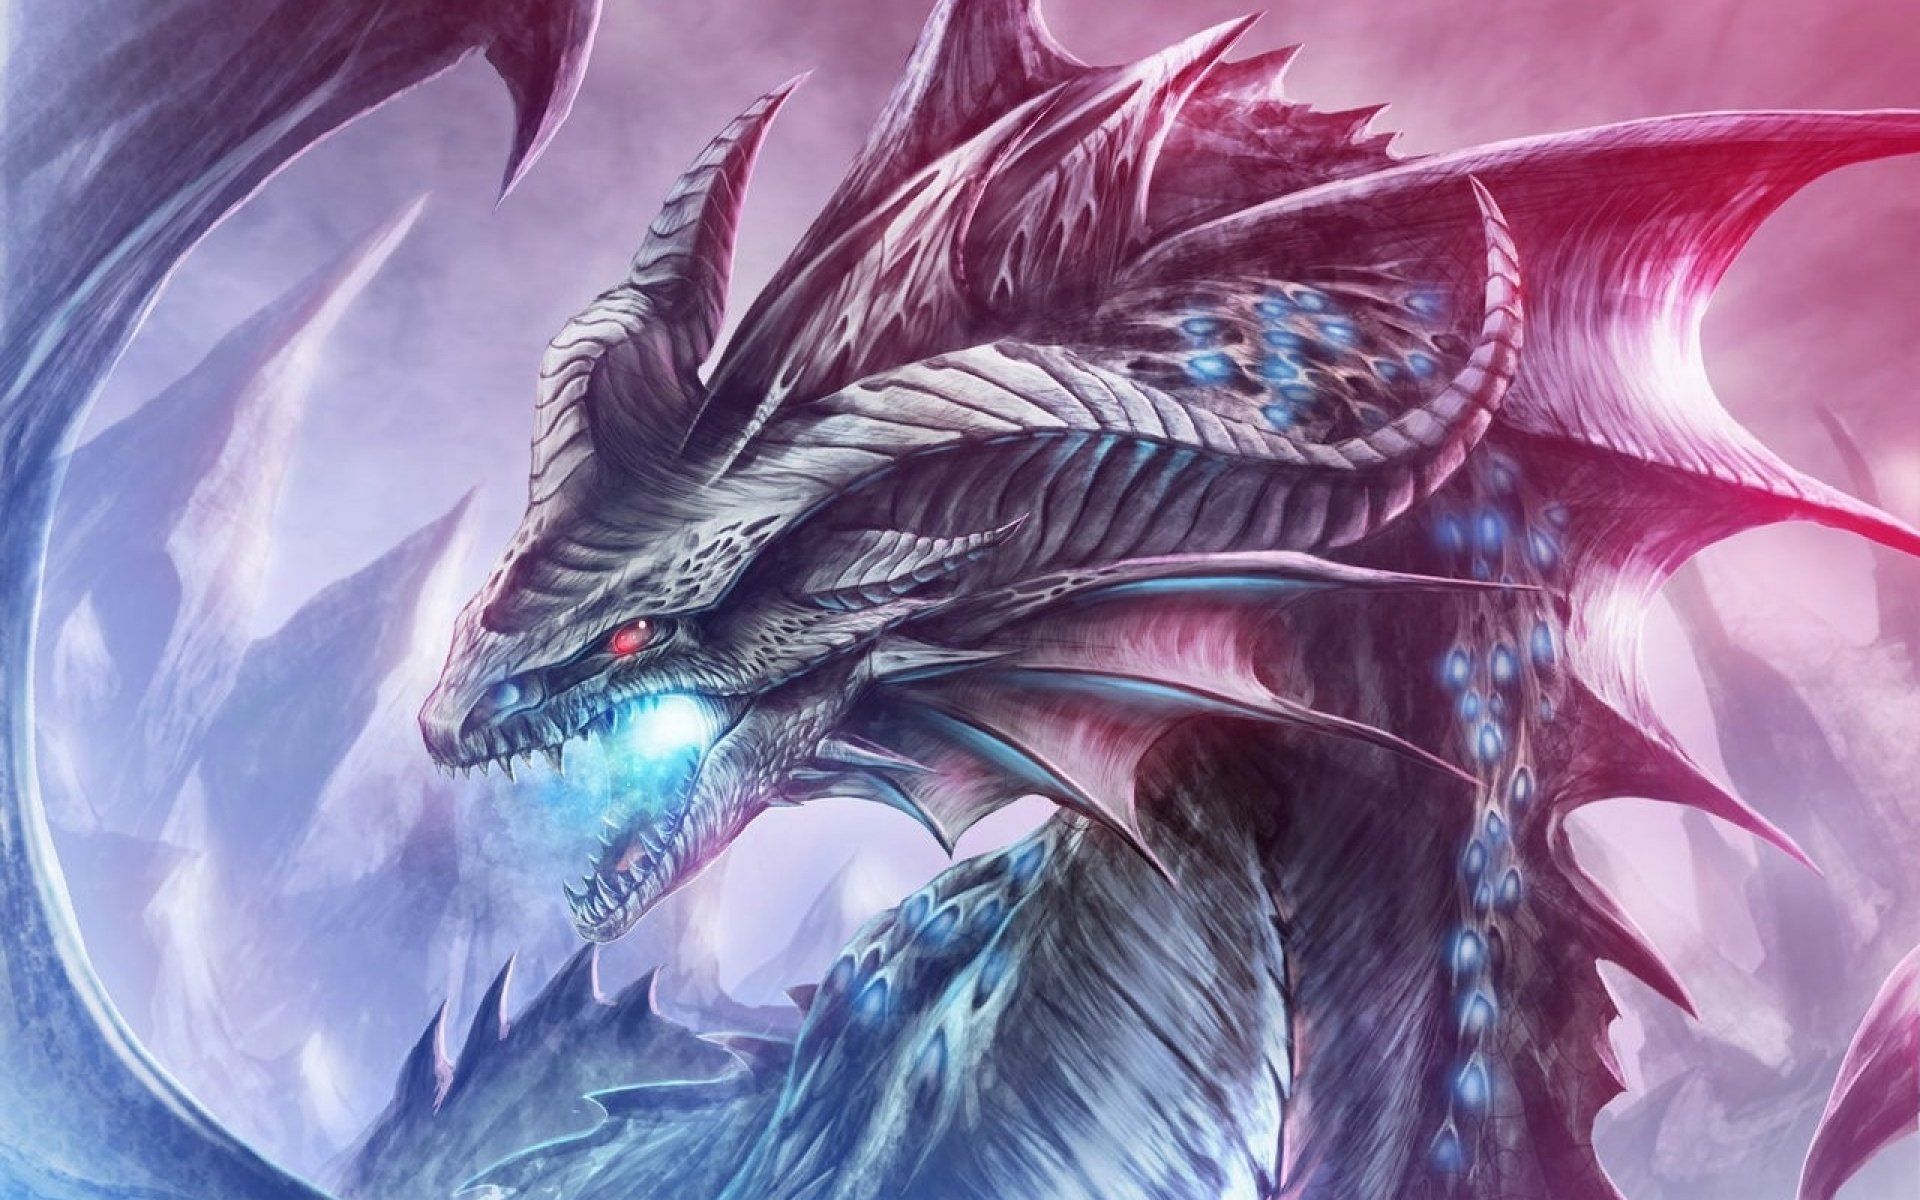 Beautiful Mystical Dragon Images Wallpapers